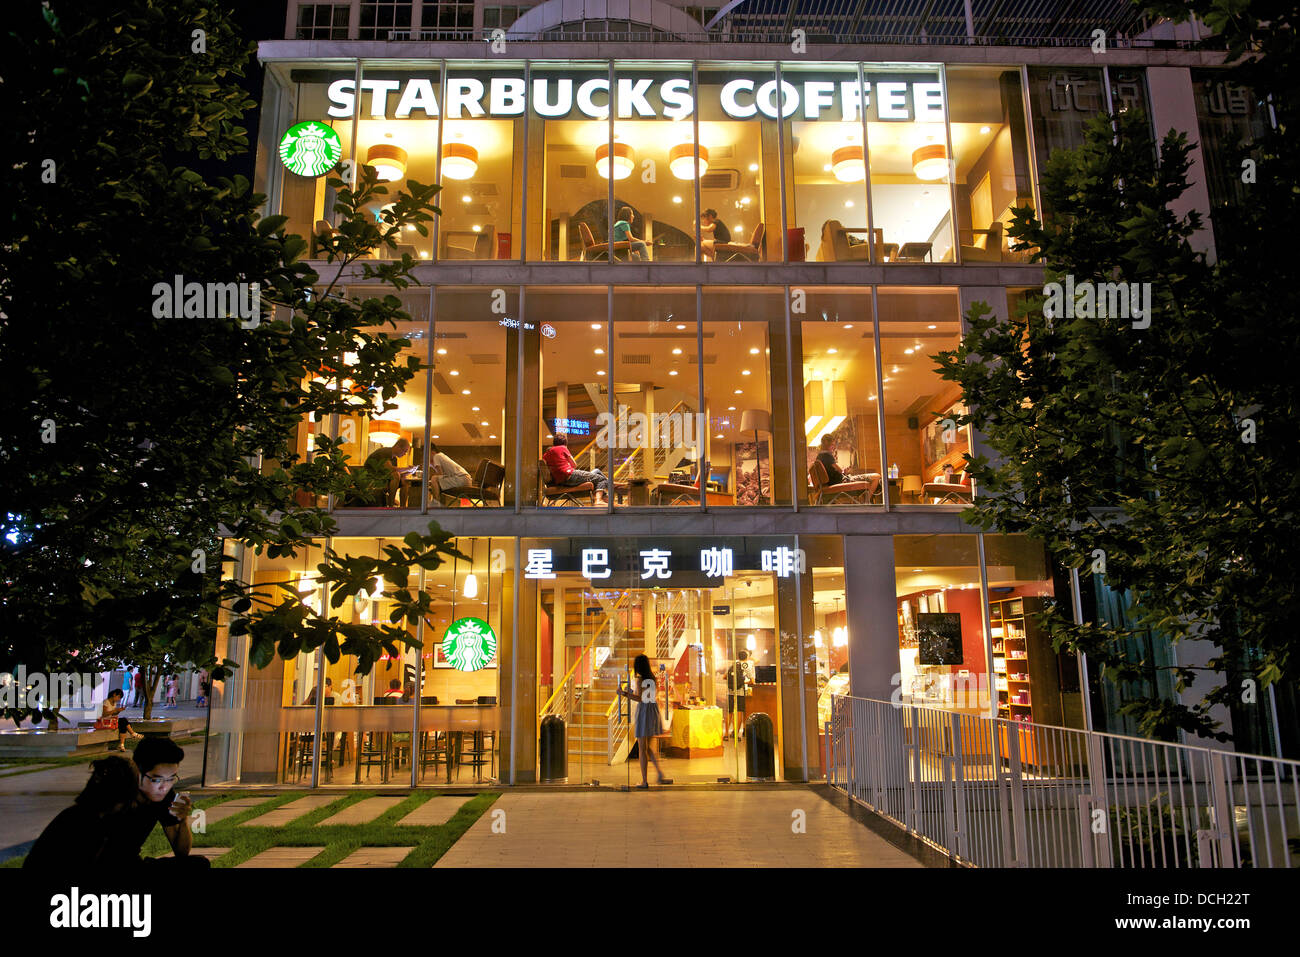 A Starbucks Coffeehouse in Beijing, China. 2013 Stock Photo